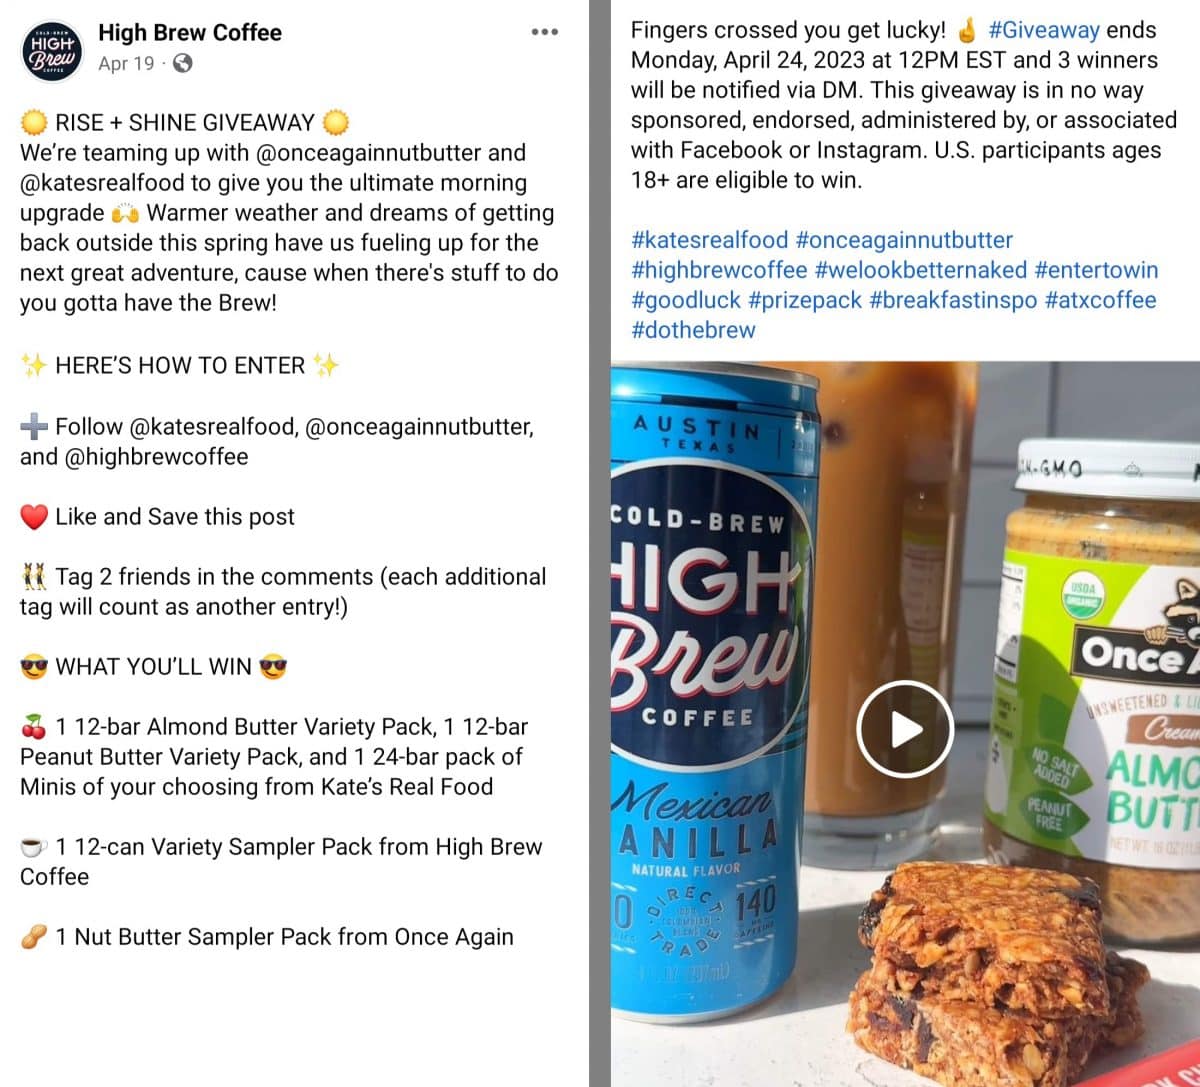 food and beverage marketing example - High Brew - Facebook